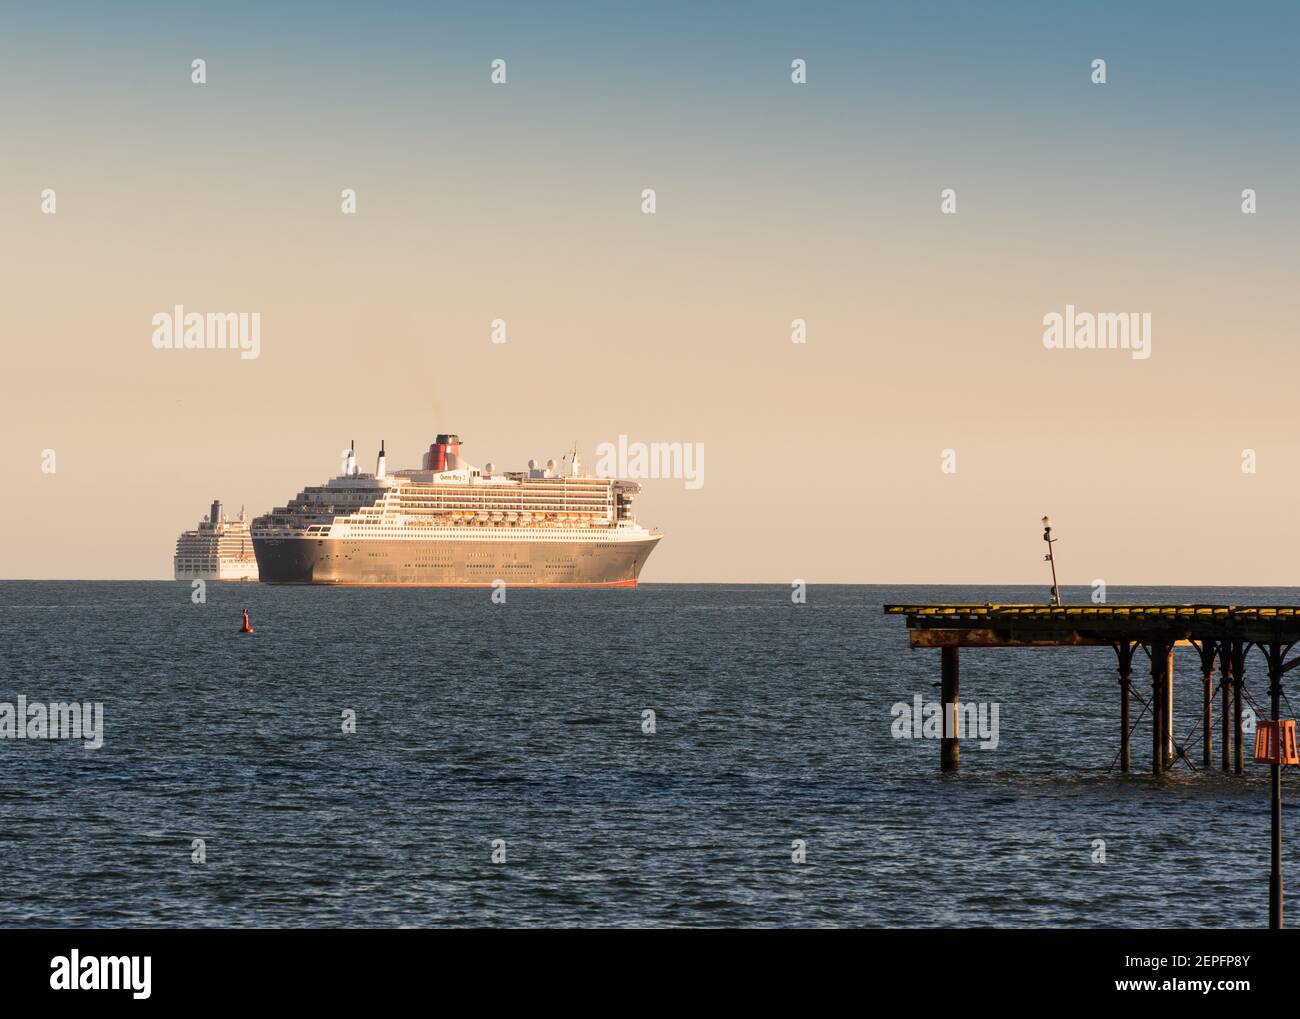 Queen Mary 2 Liner of the Cunard Line at anchor off the coast of Devon during the CV19 pandemic. Stock Photo